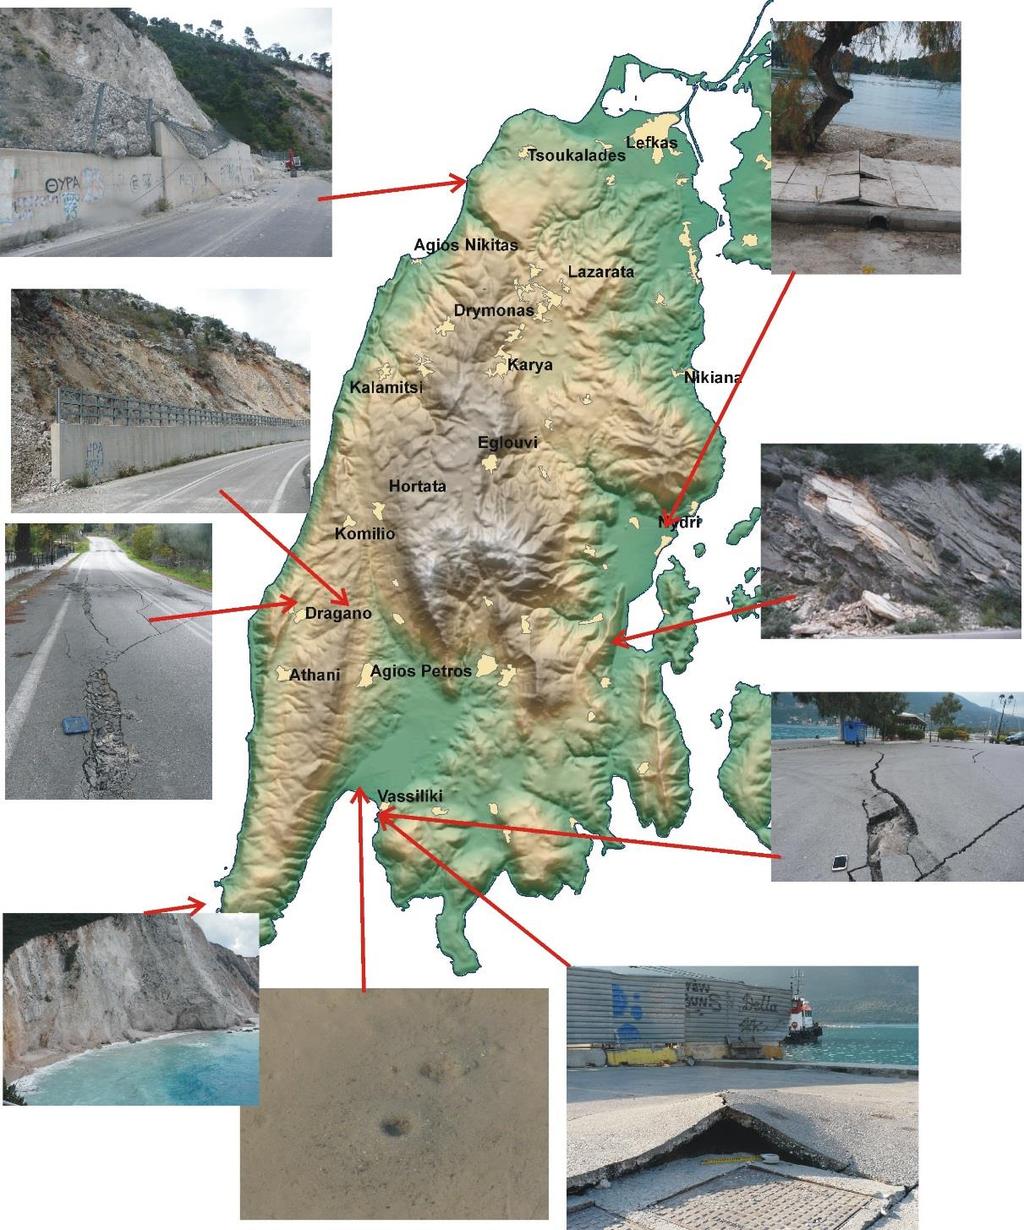 Figure 3 - Spatial distribution of earthquake-induced failures triggered by the Lefkada 2015 event. See text for discussion. 6.